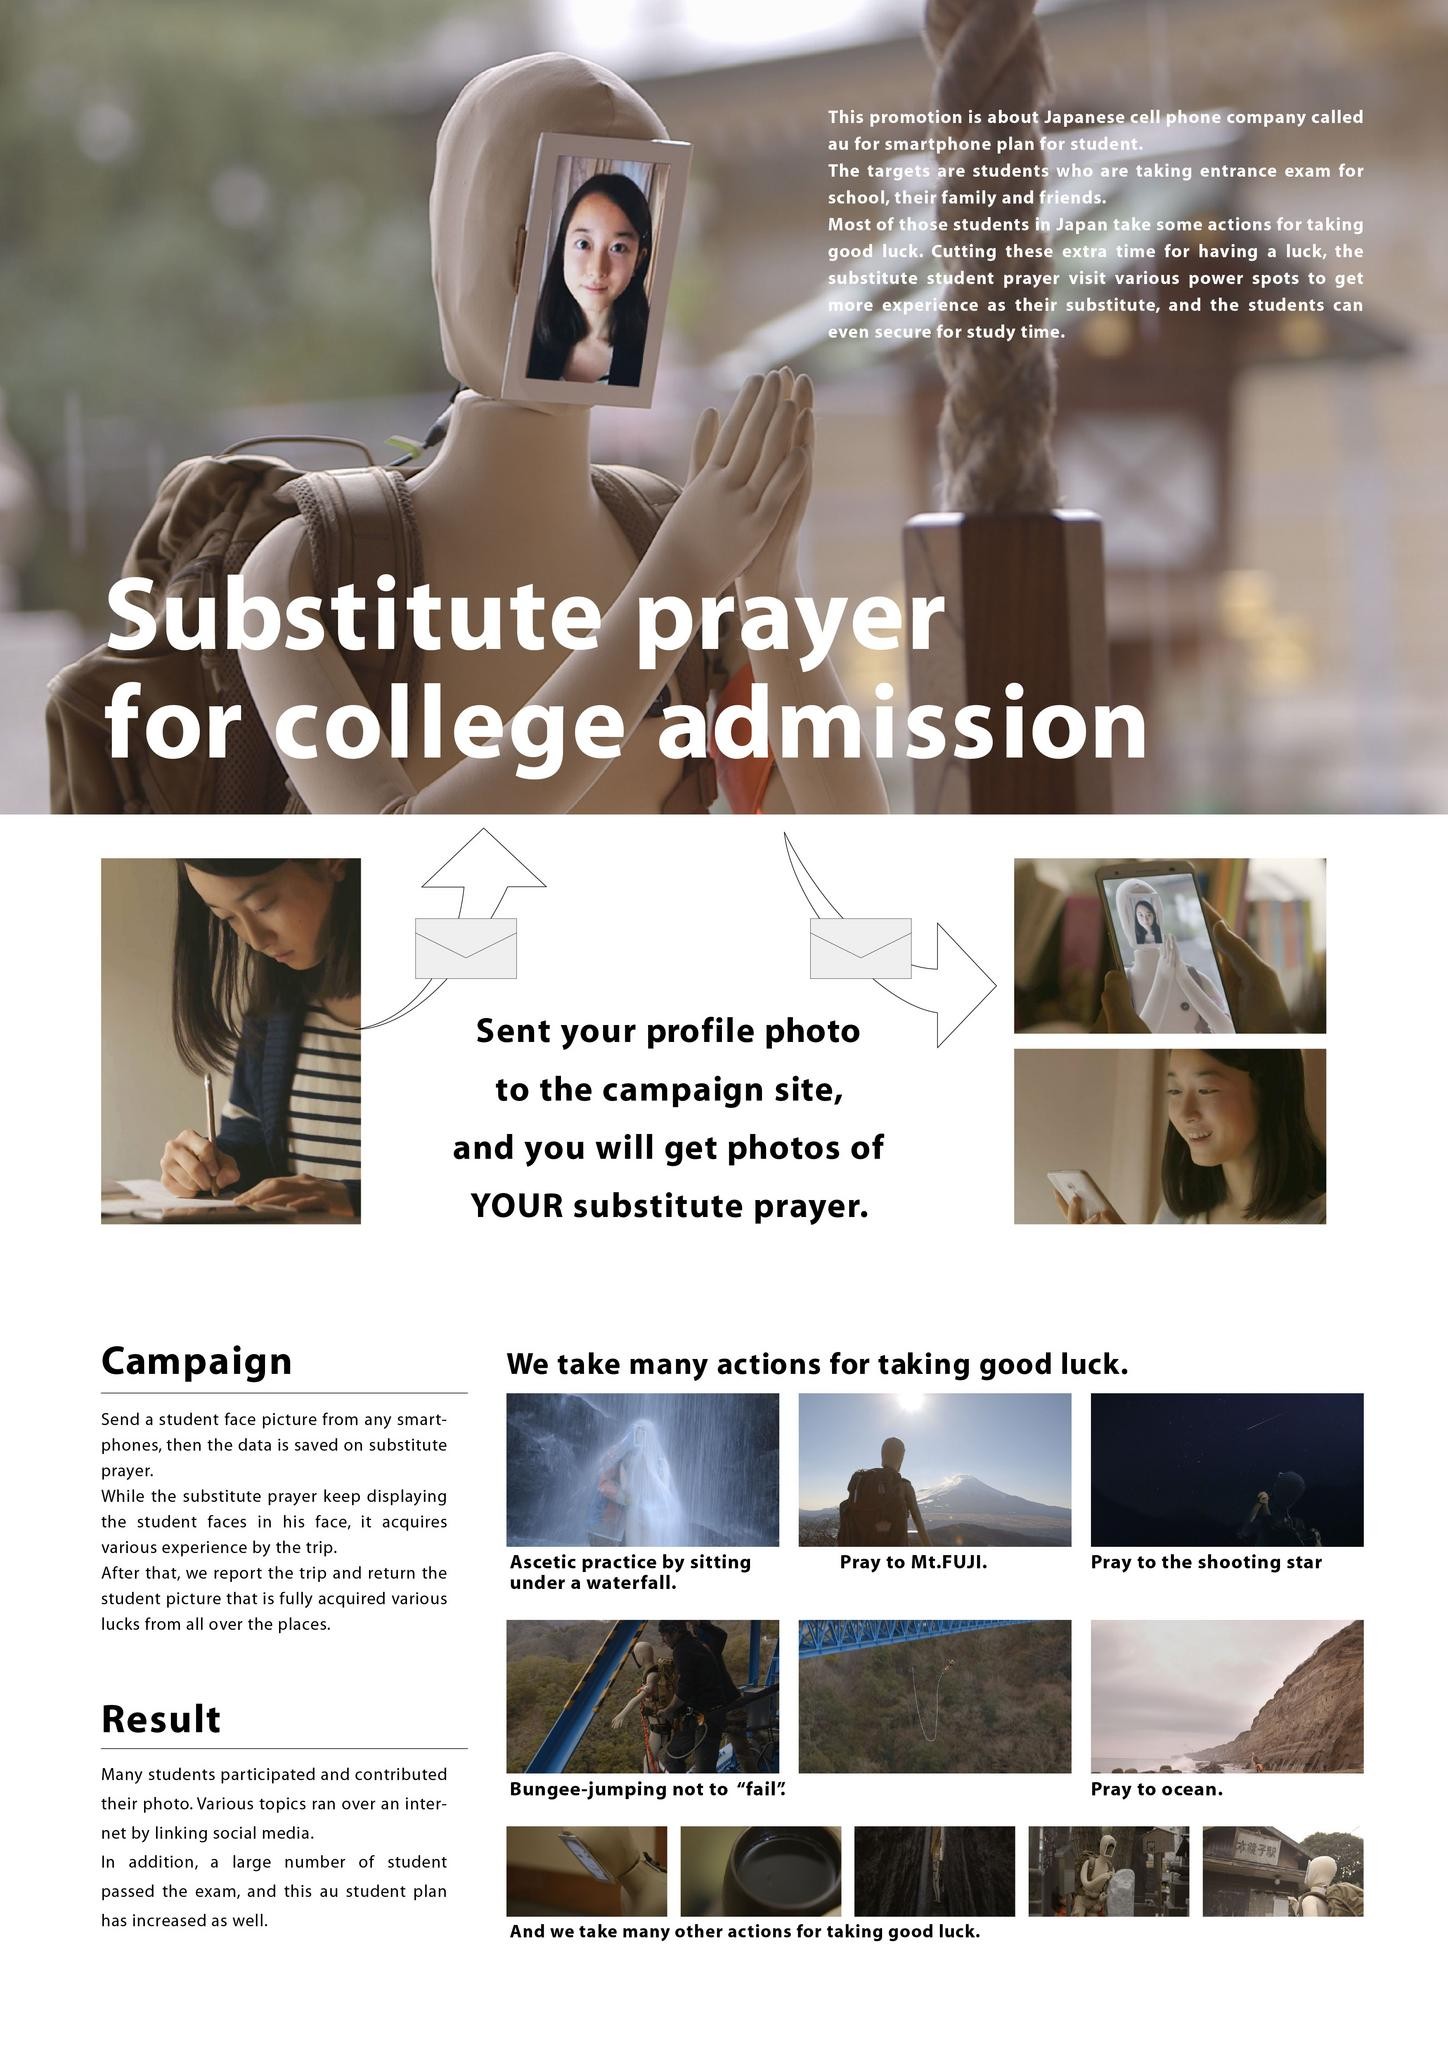 SUBSTITUTE PRAYER FOR COLLEGE ADMISSION